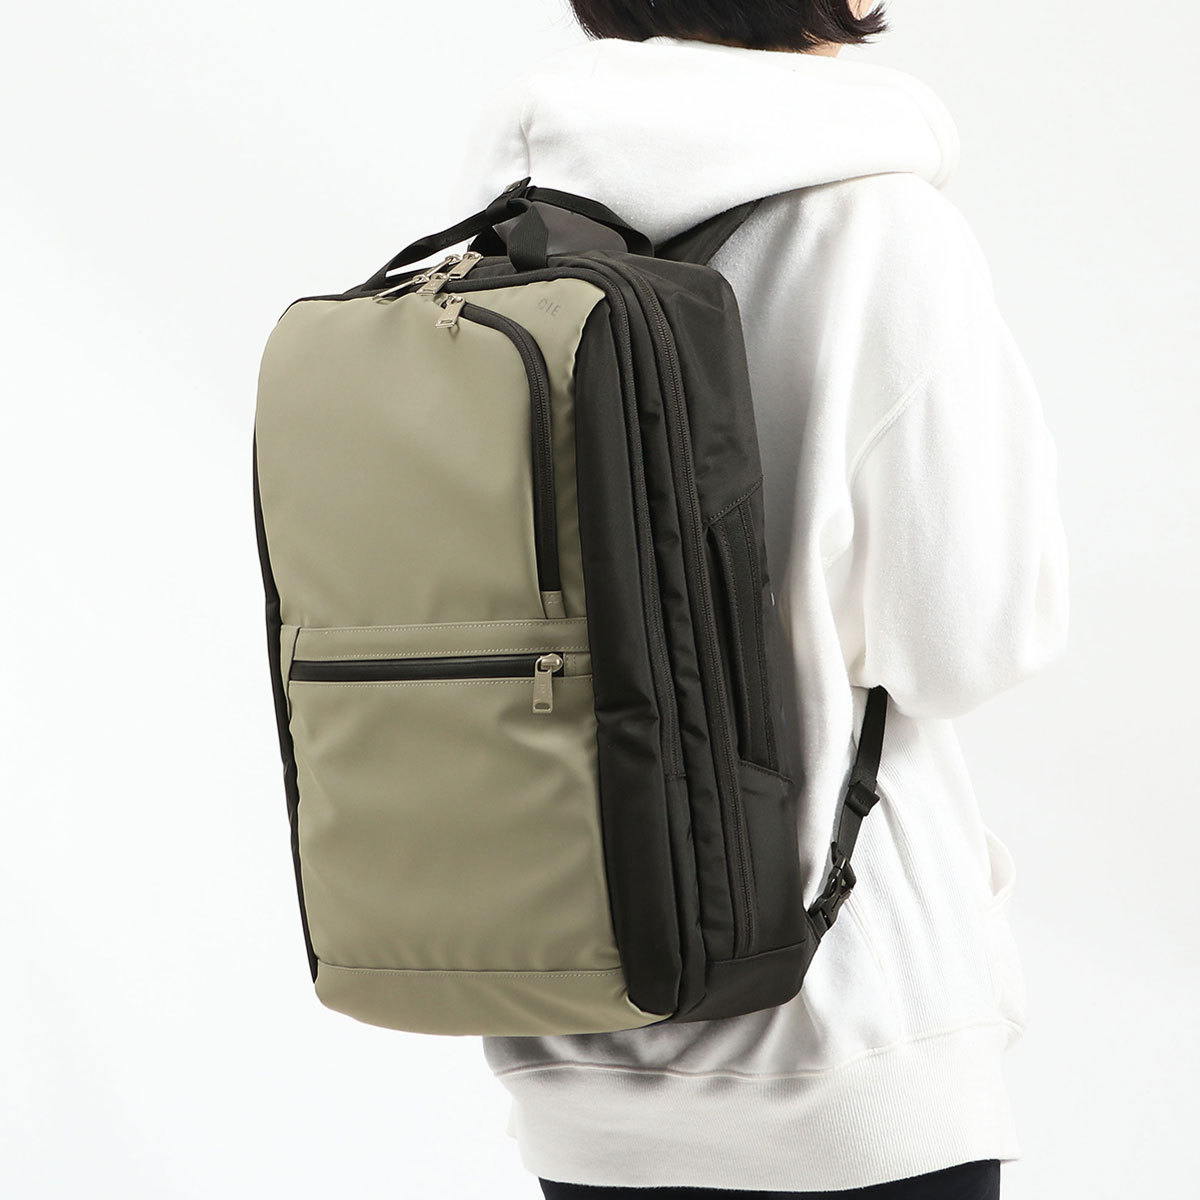 CIE リュック シー VARIOUS 2WAYBACKPACK - L ヴァリアス 2WAY リュ...